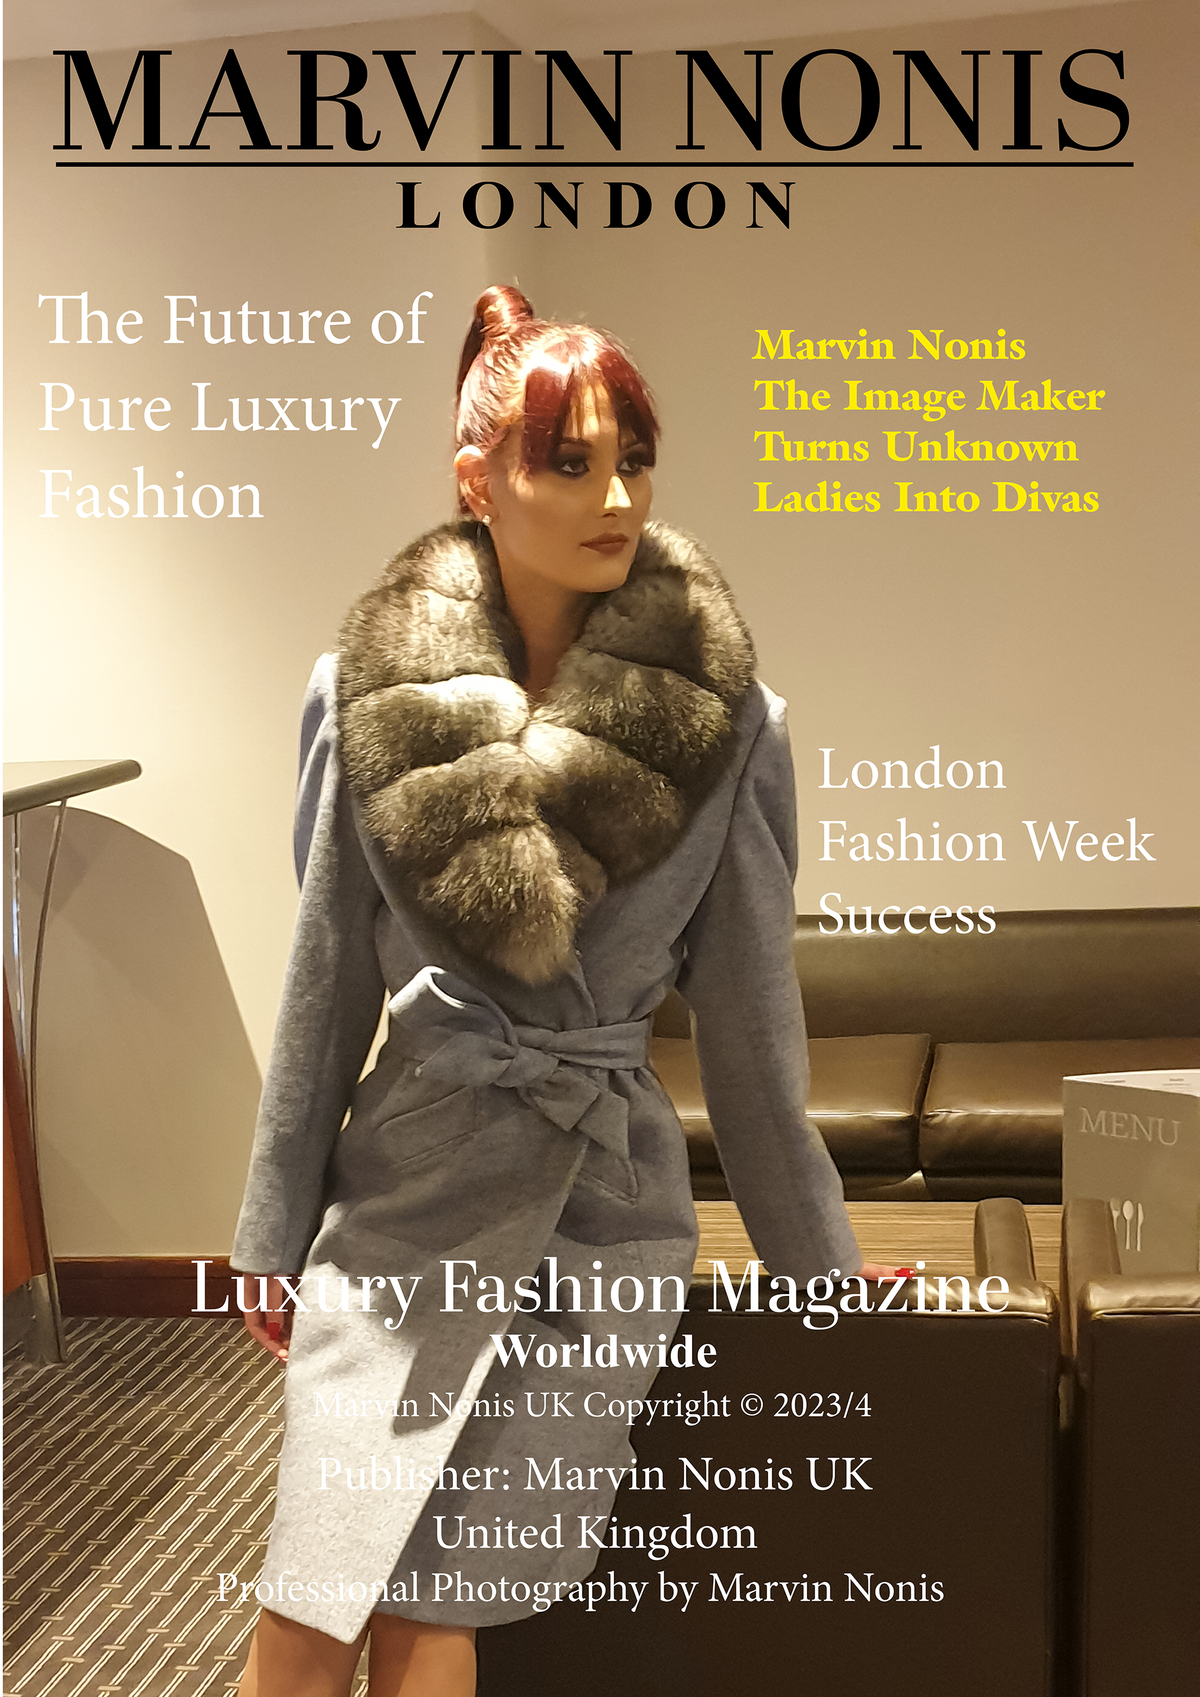 Experience Pure Luxury Fashion with the Latest Edition of Marvin Nonis Mag